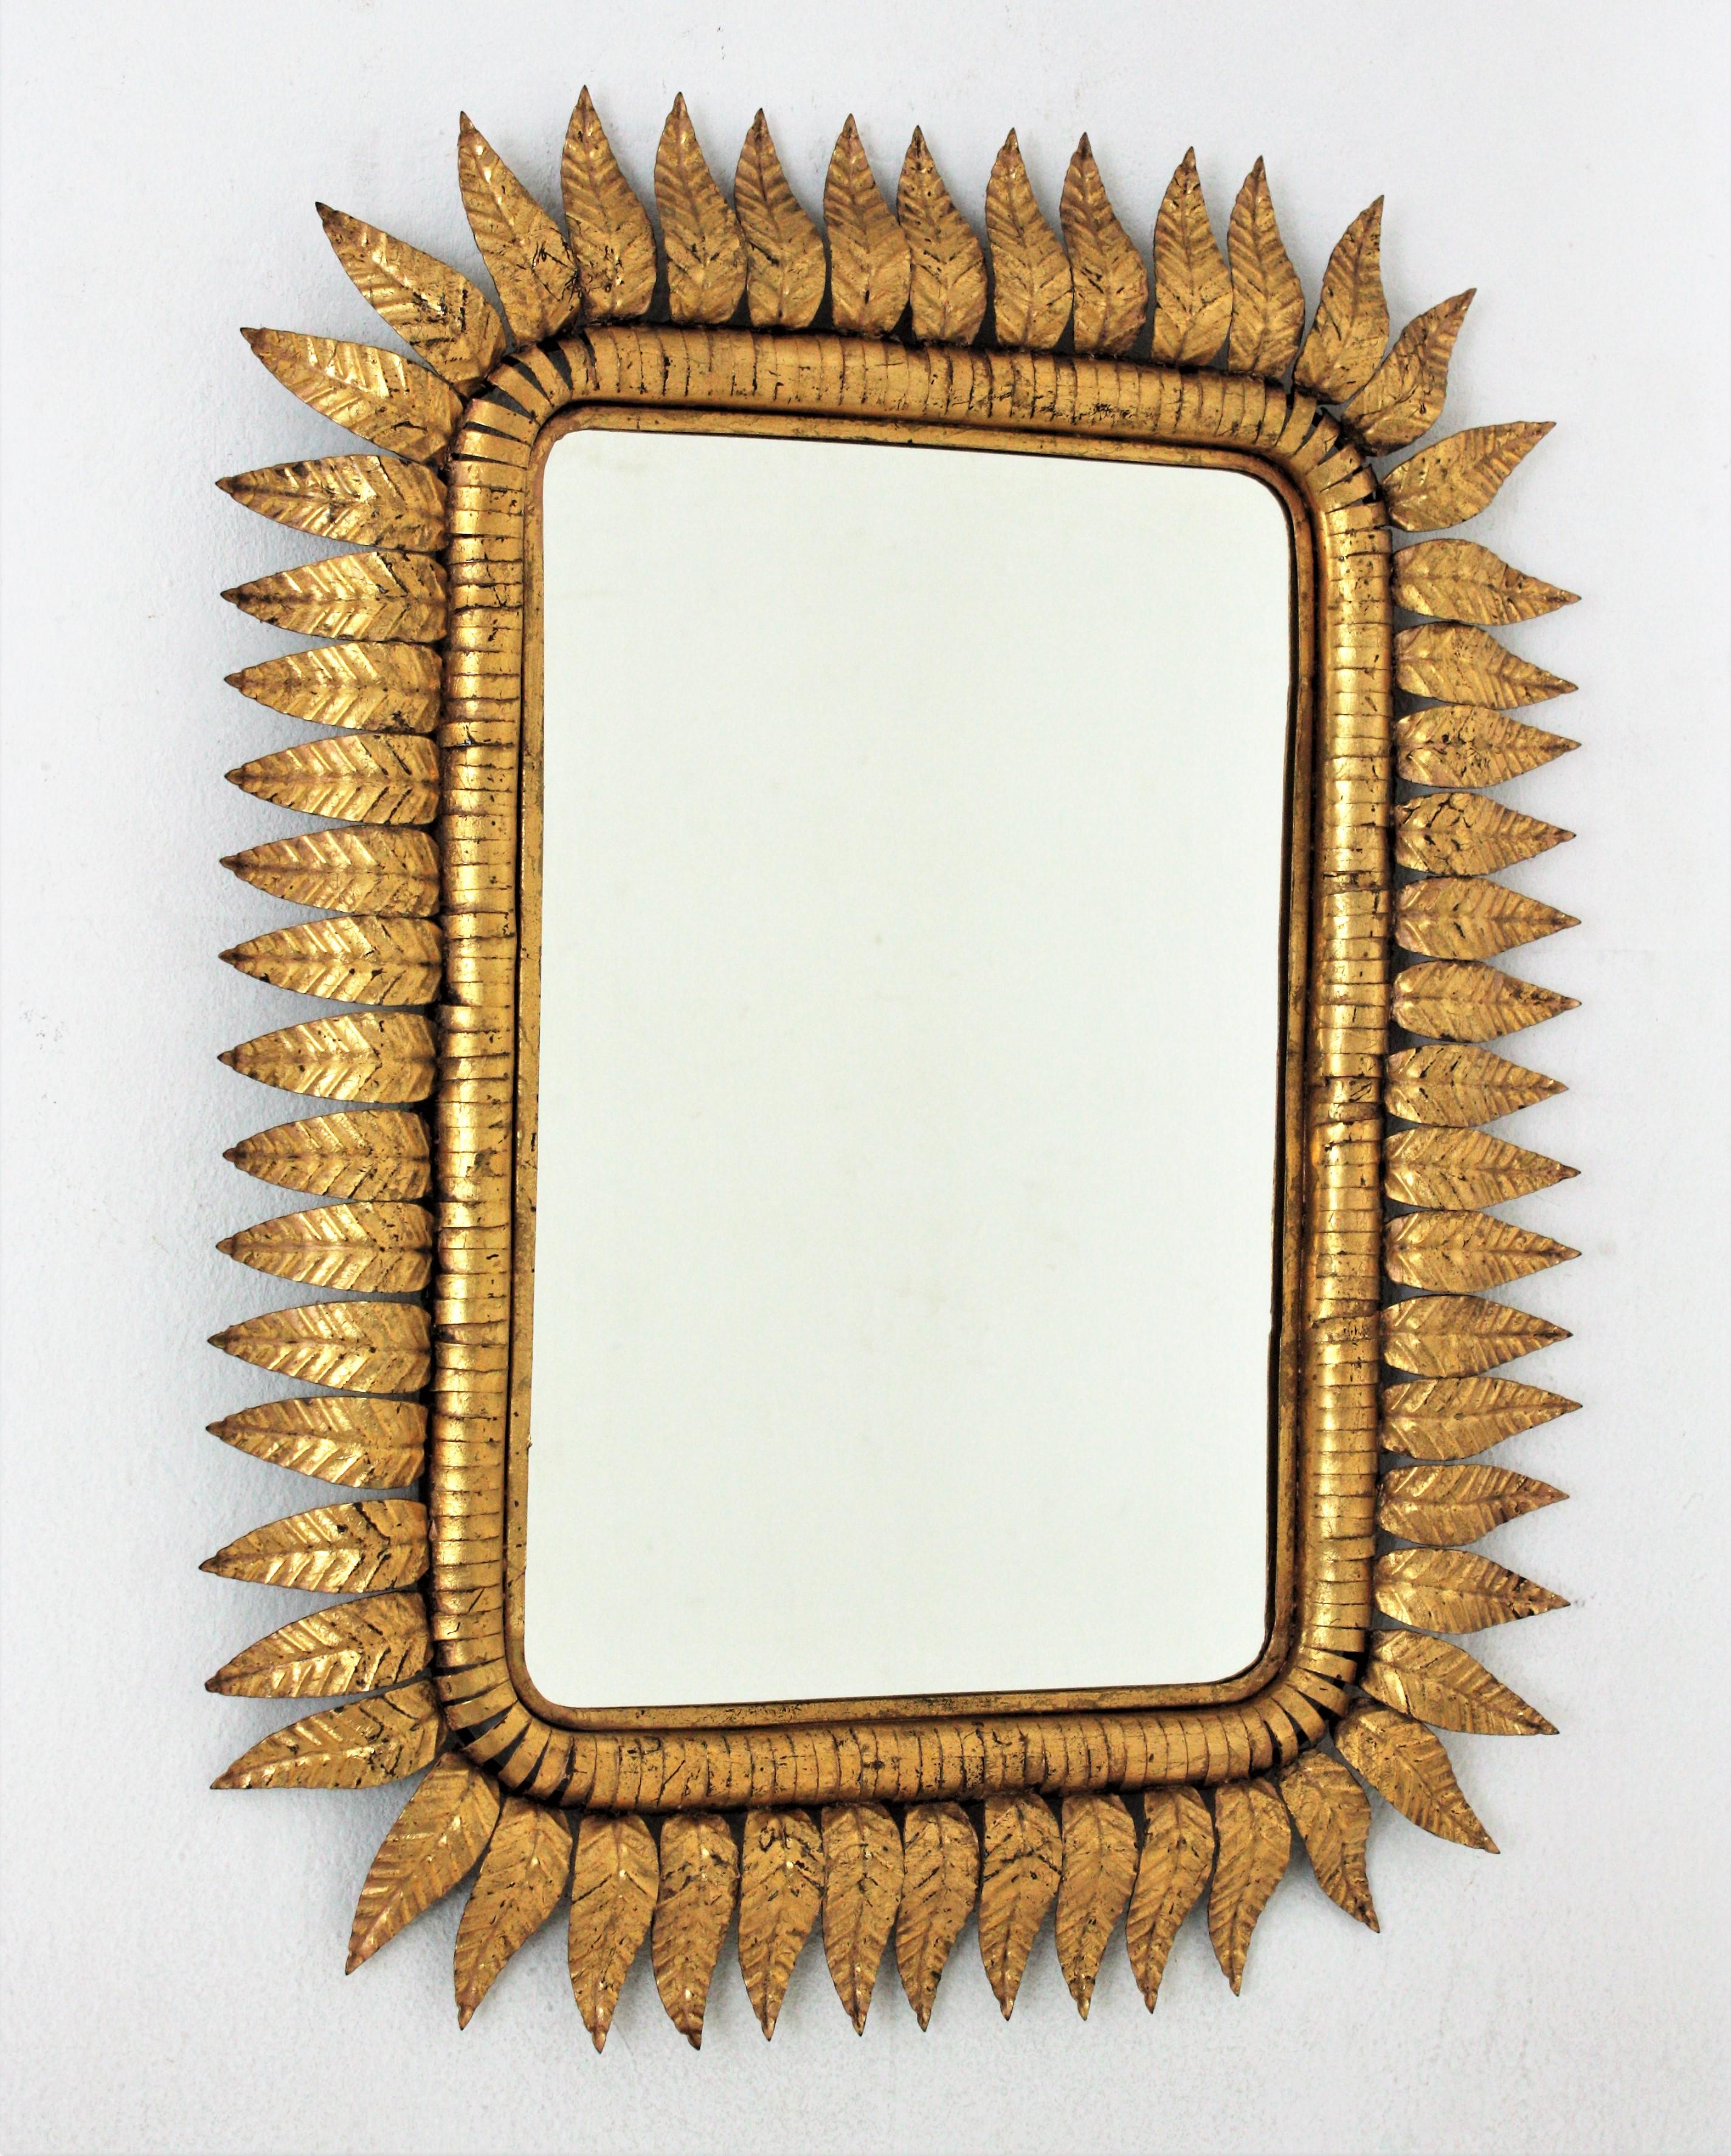 Hand-hammered iron sunburst rectangular wall mirror with gold leaf finish, Spain, 1950s.
Highly decorative rectangular leaf framed sunburst mirrors with gold leaf gilding.
Entirely made by hand. Very detailed work surrounding the mirror glass. It